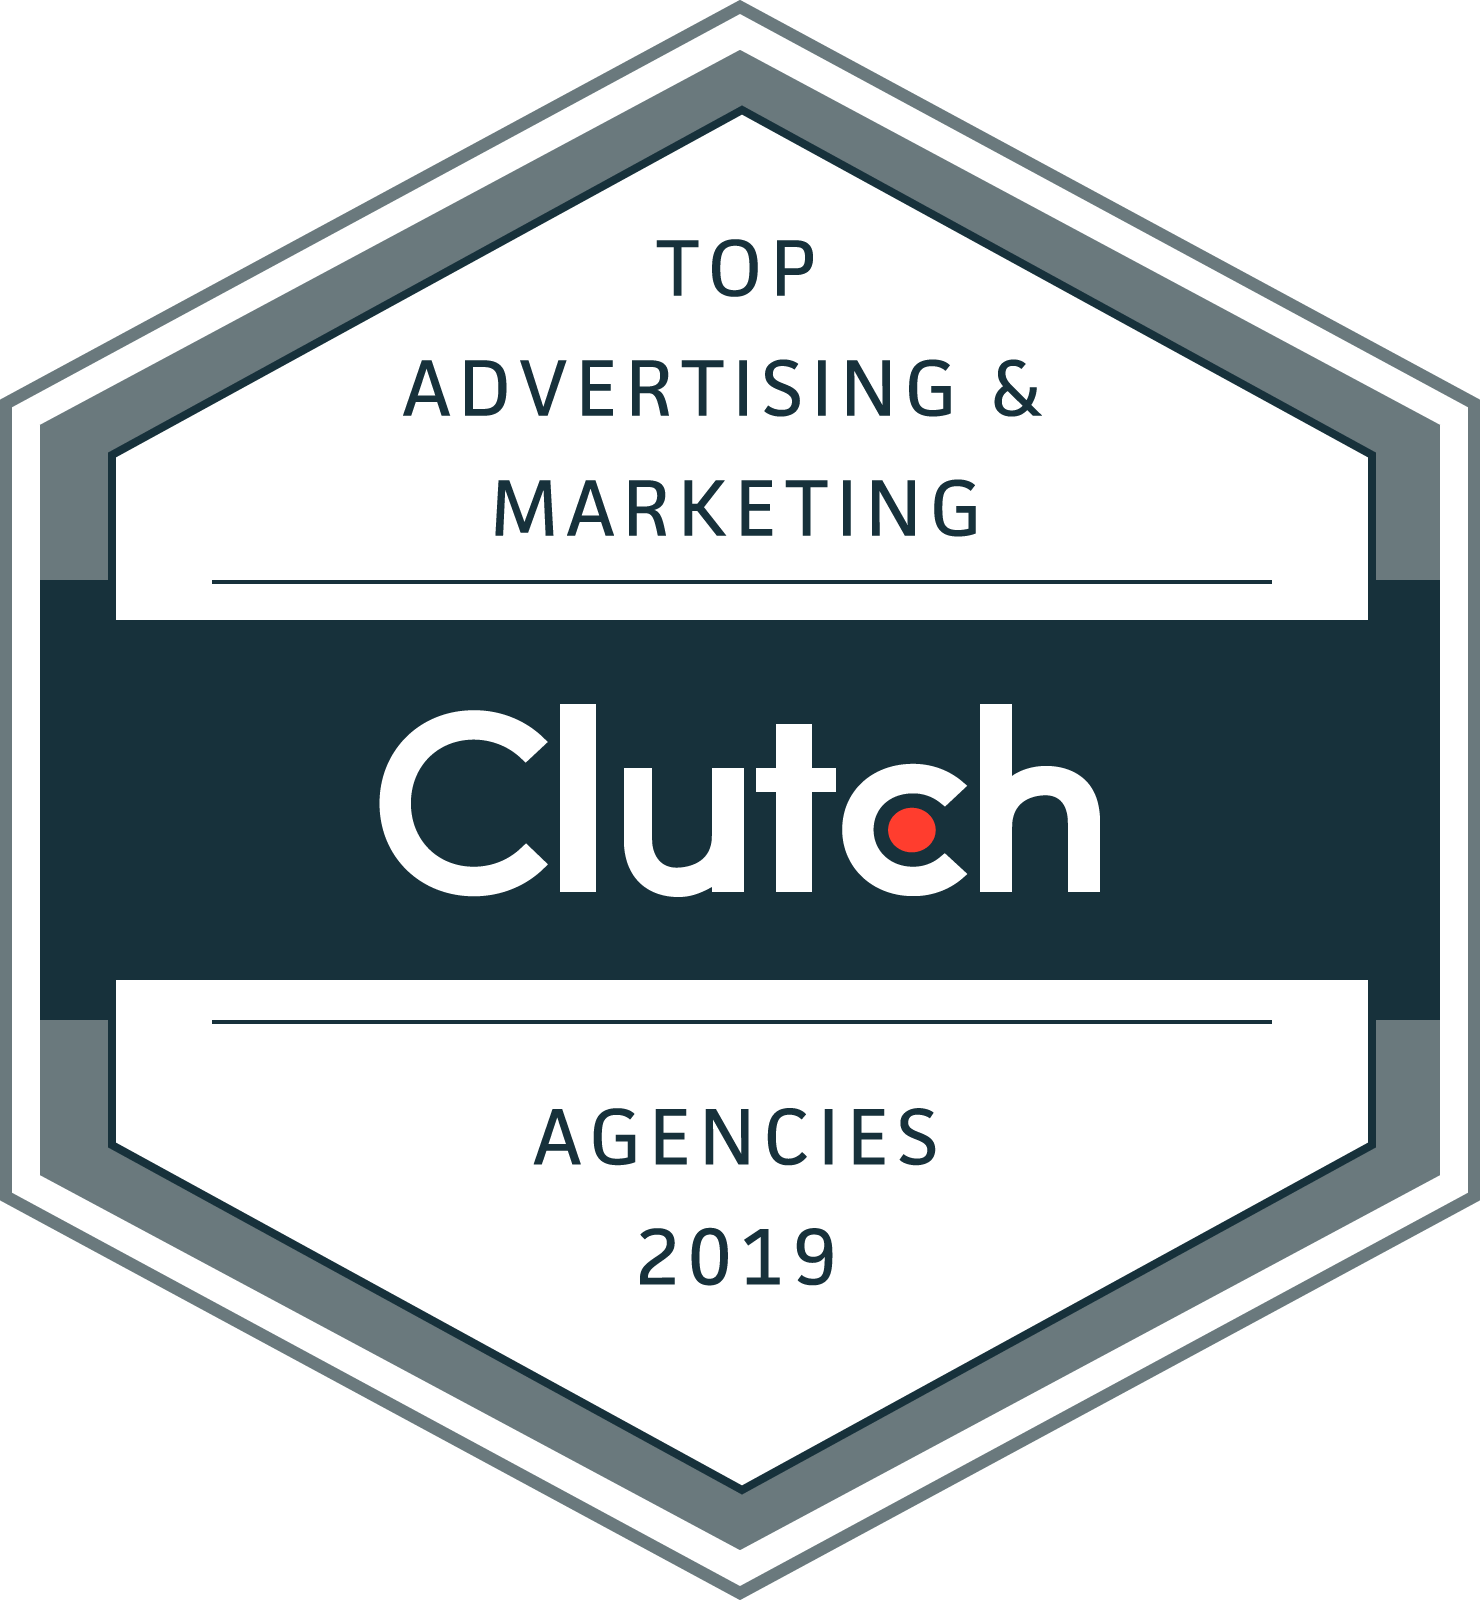 Clutch named SmartAcre to its top marketing agency list for 2019 in both Philadelphia and Denver